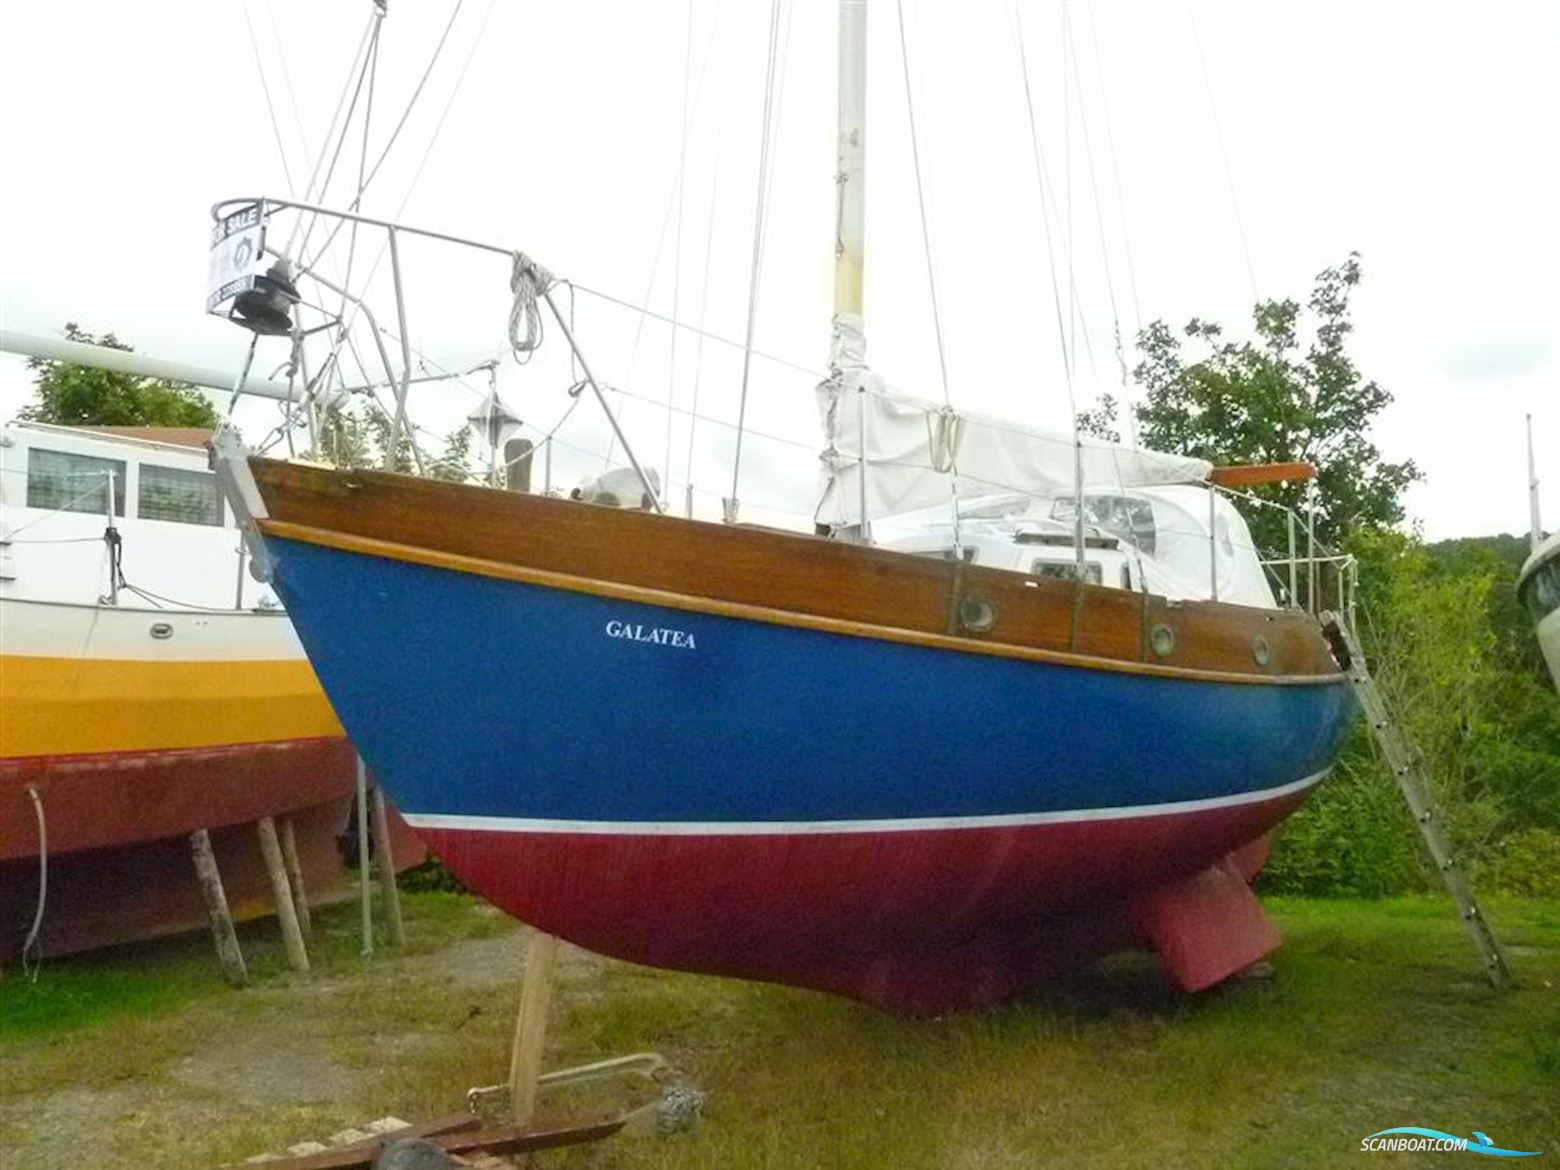 Rossiter Pintail 27 Sailing boat 1979, with 1 x Bukh DV24 engine, United Kingdom